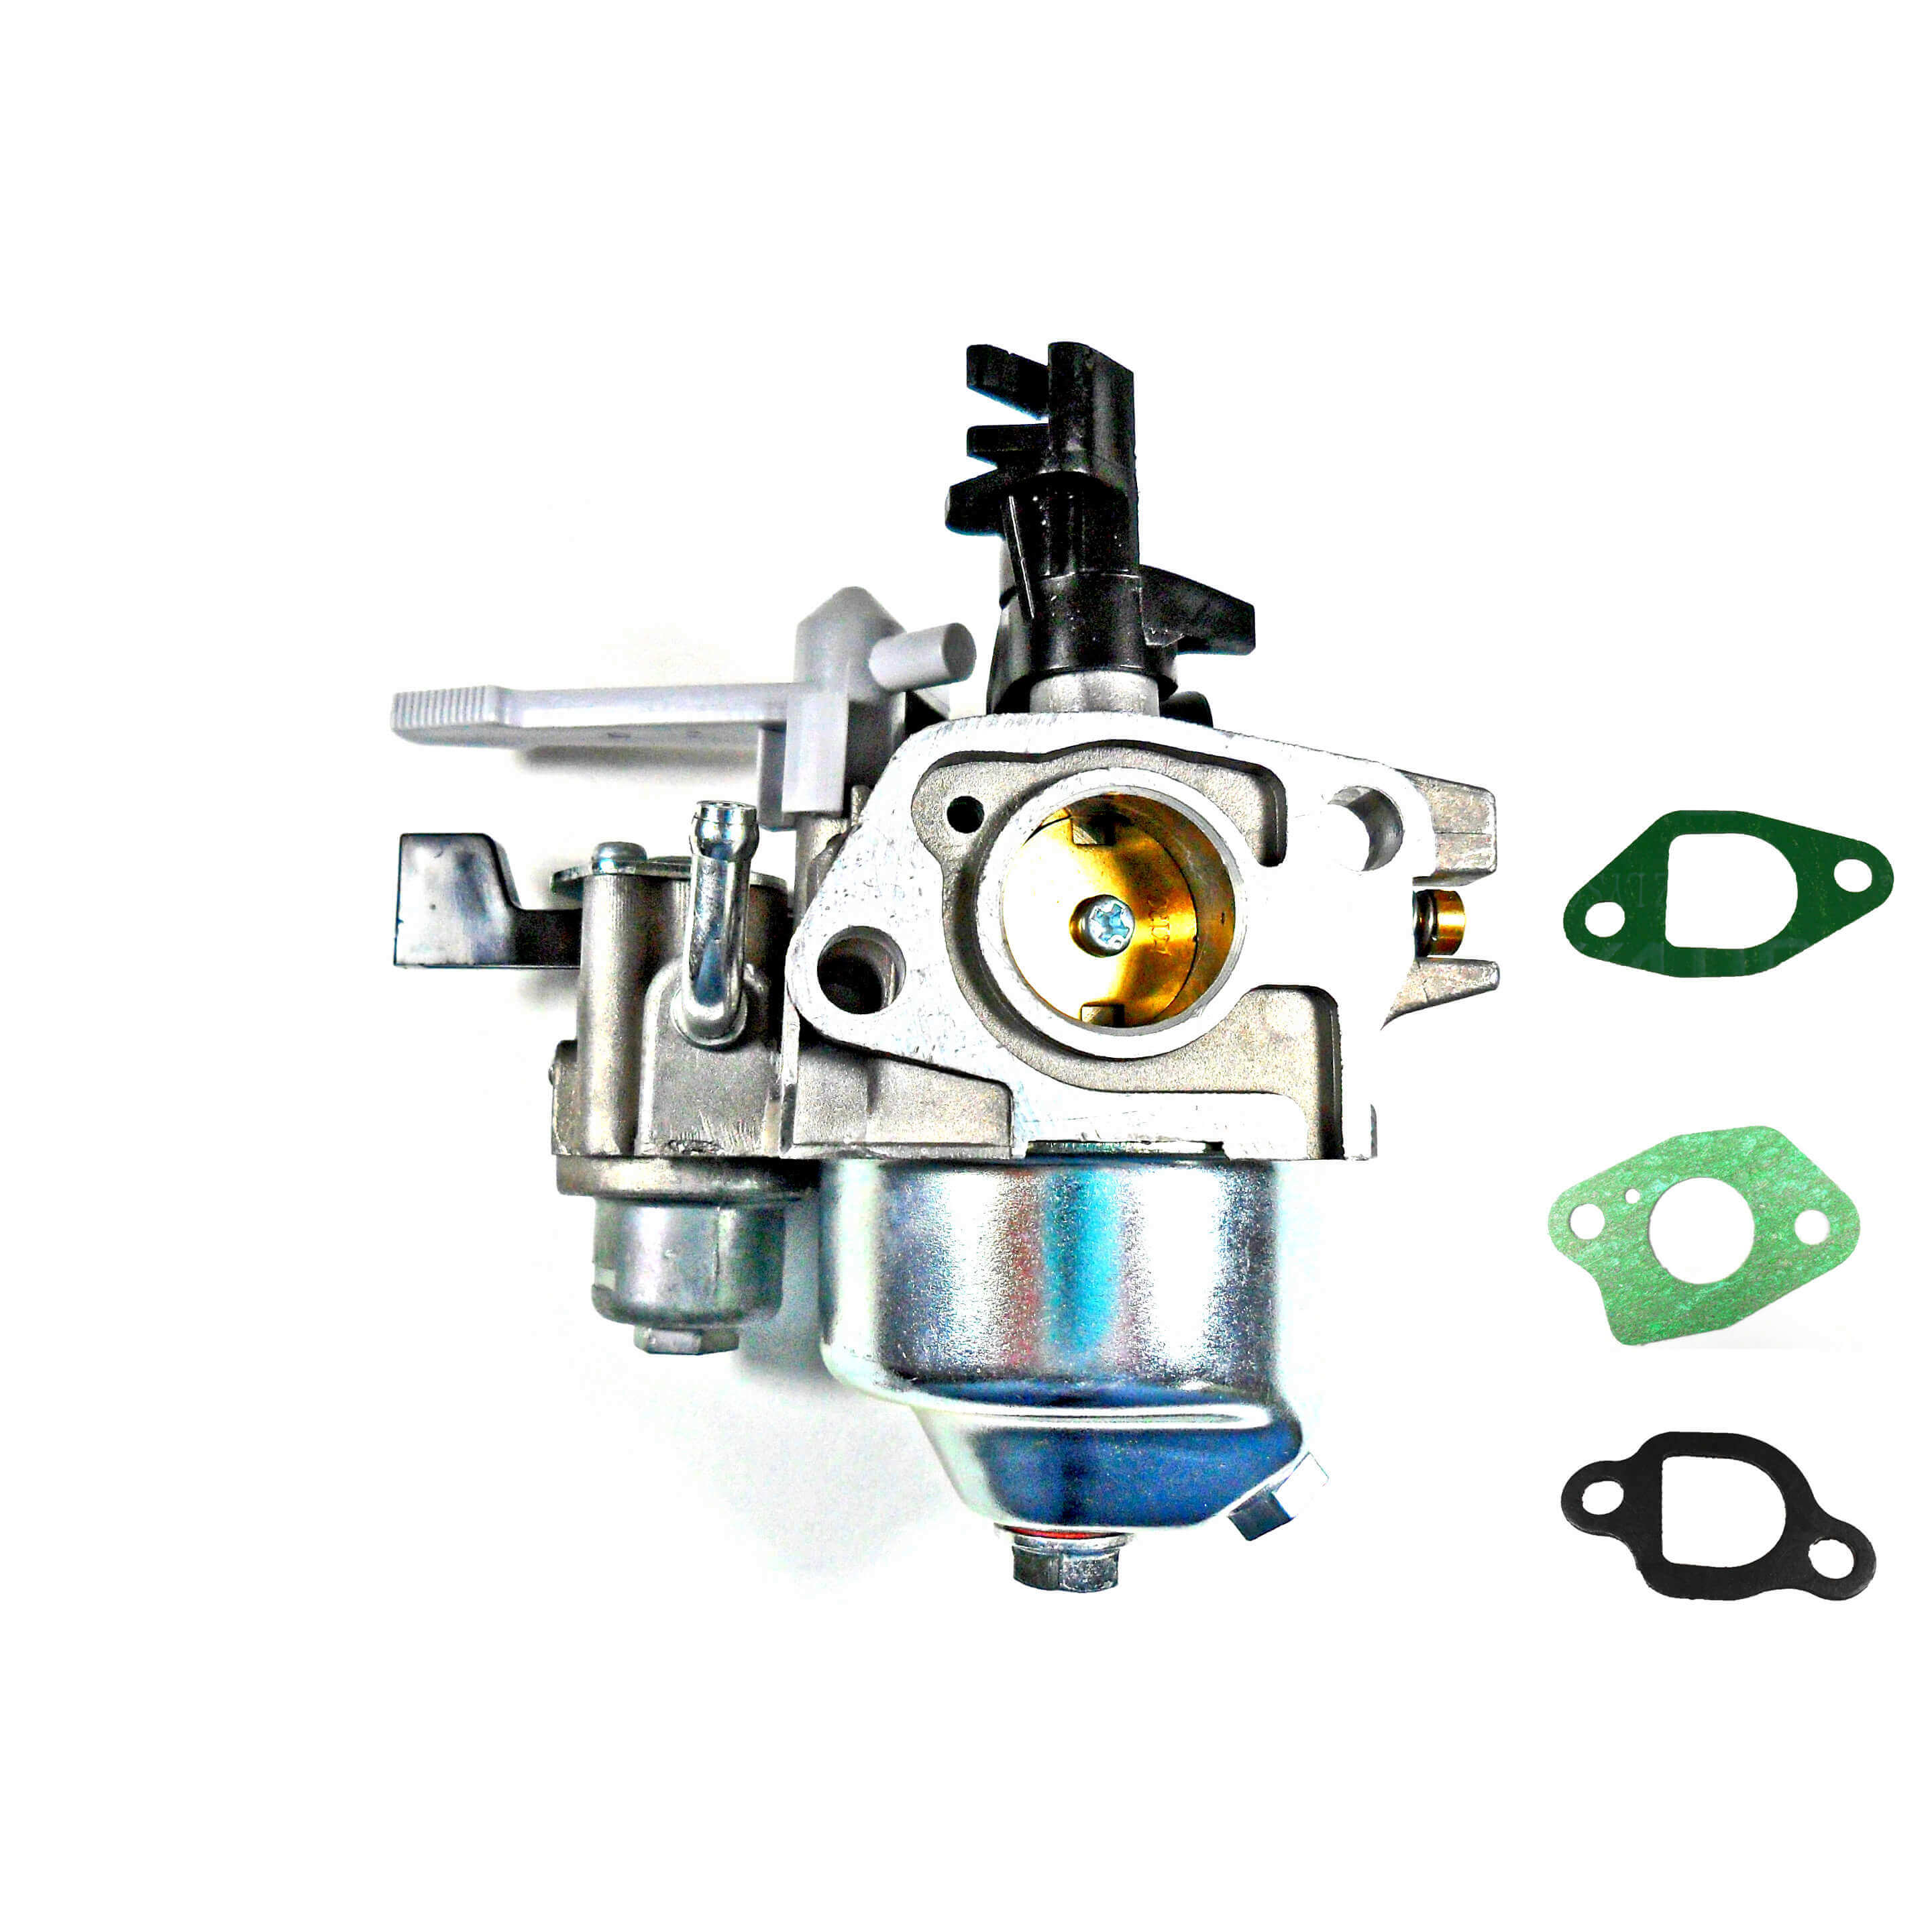 GX160, GX200 Type Carburetor With Manual Choke Lever & Gaskets For 5.5hp (163cc) to 6.5hp (212cc) engines on many ATVs, Generators, GoKarts, MiniBikes